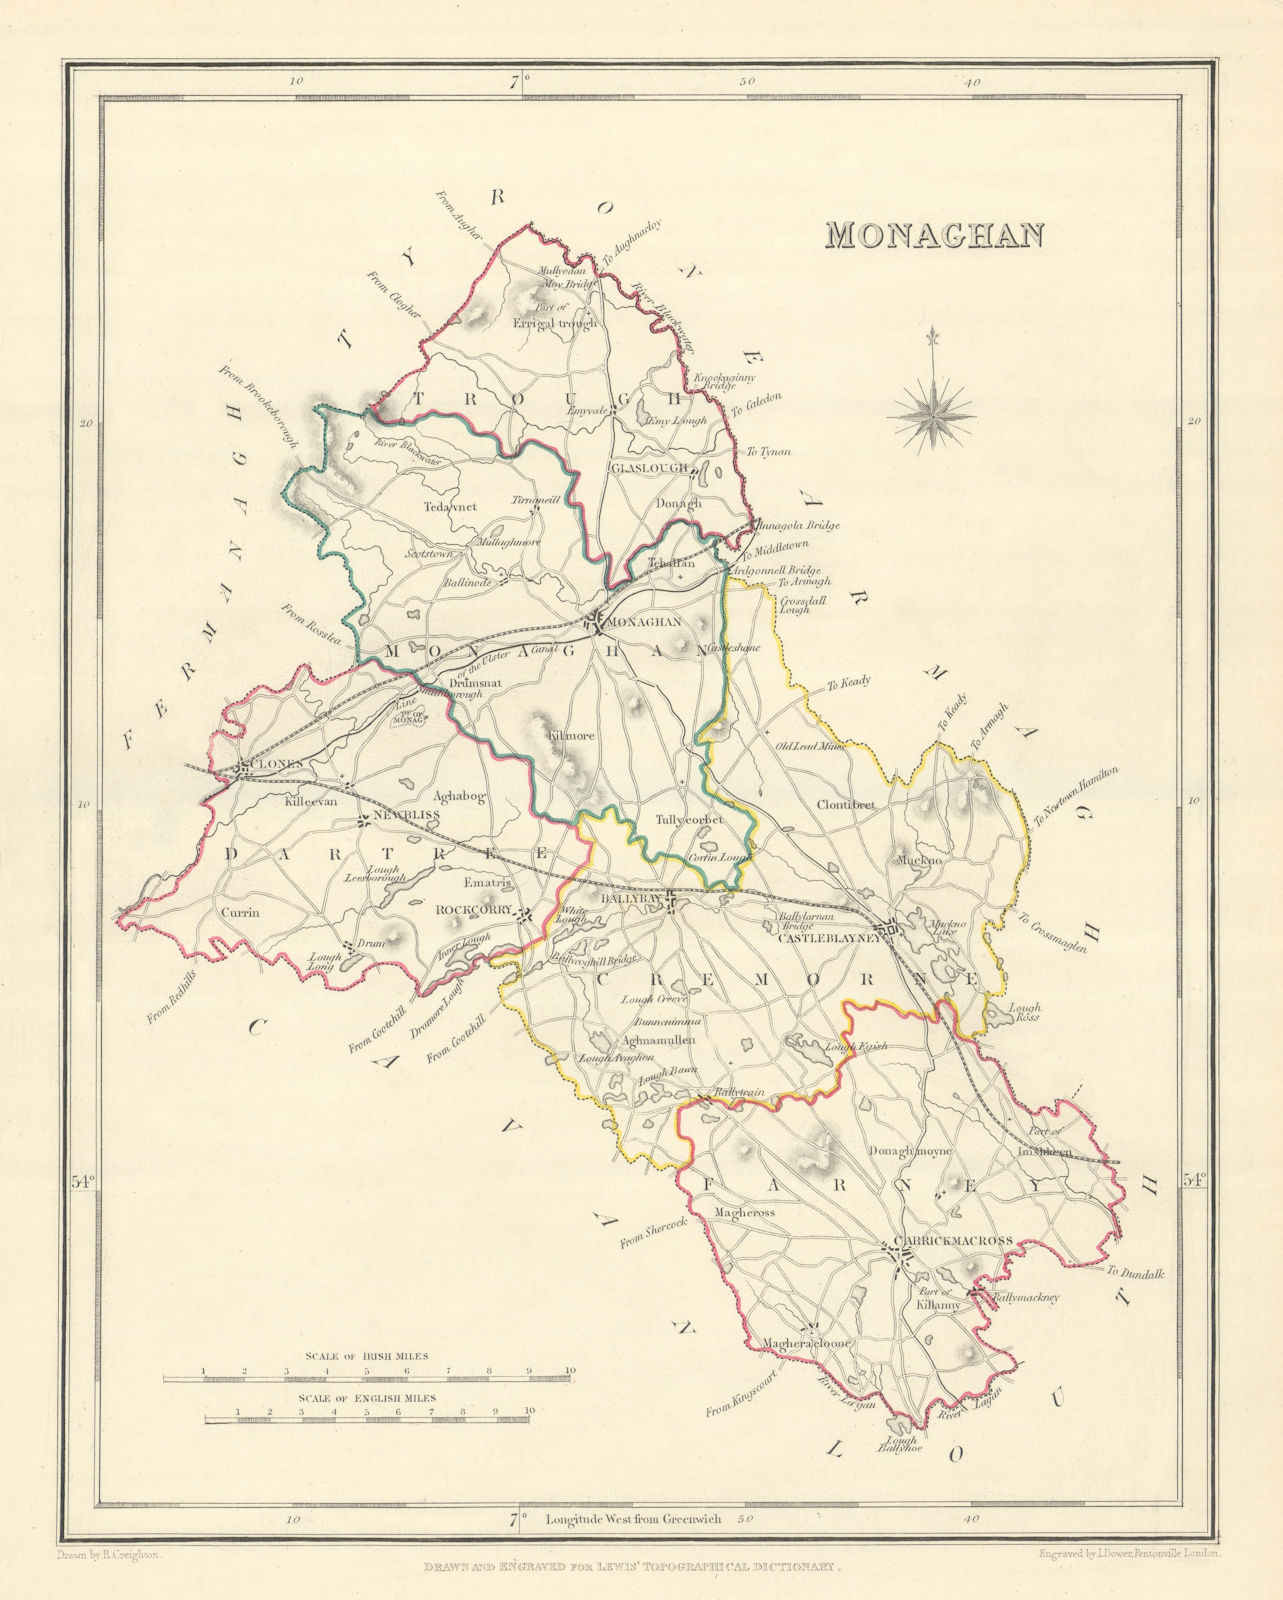 Associate Product COUNTY MONAGHAN antique map for LEWIS by CREIGHTON & DOWER. Ireland 1850